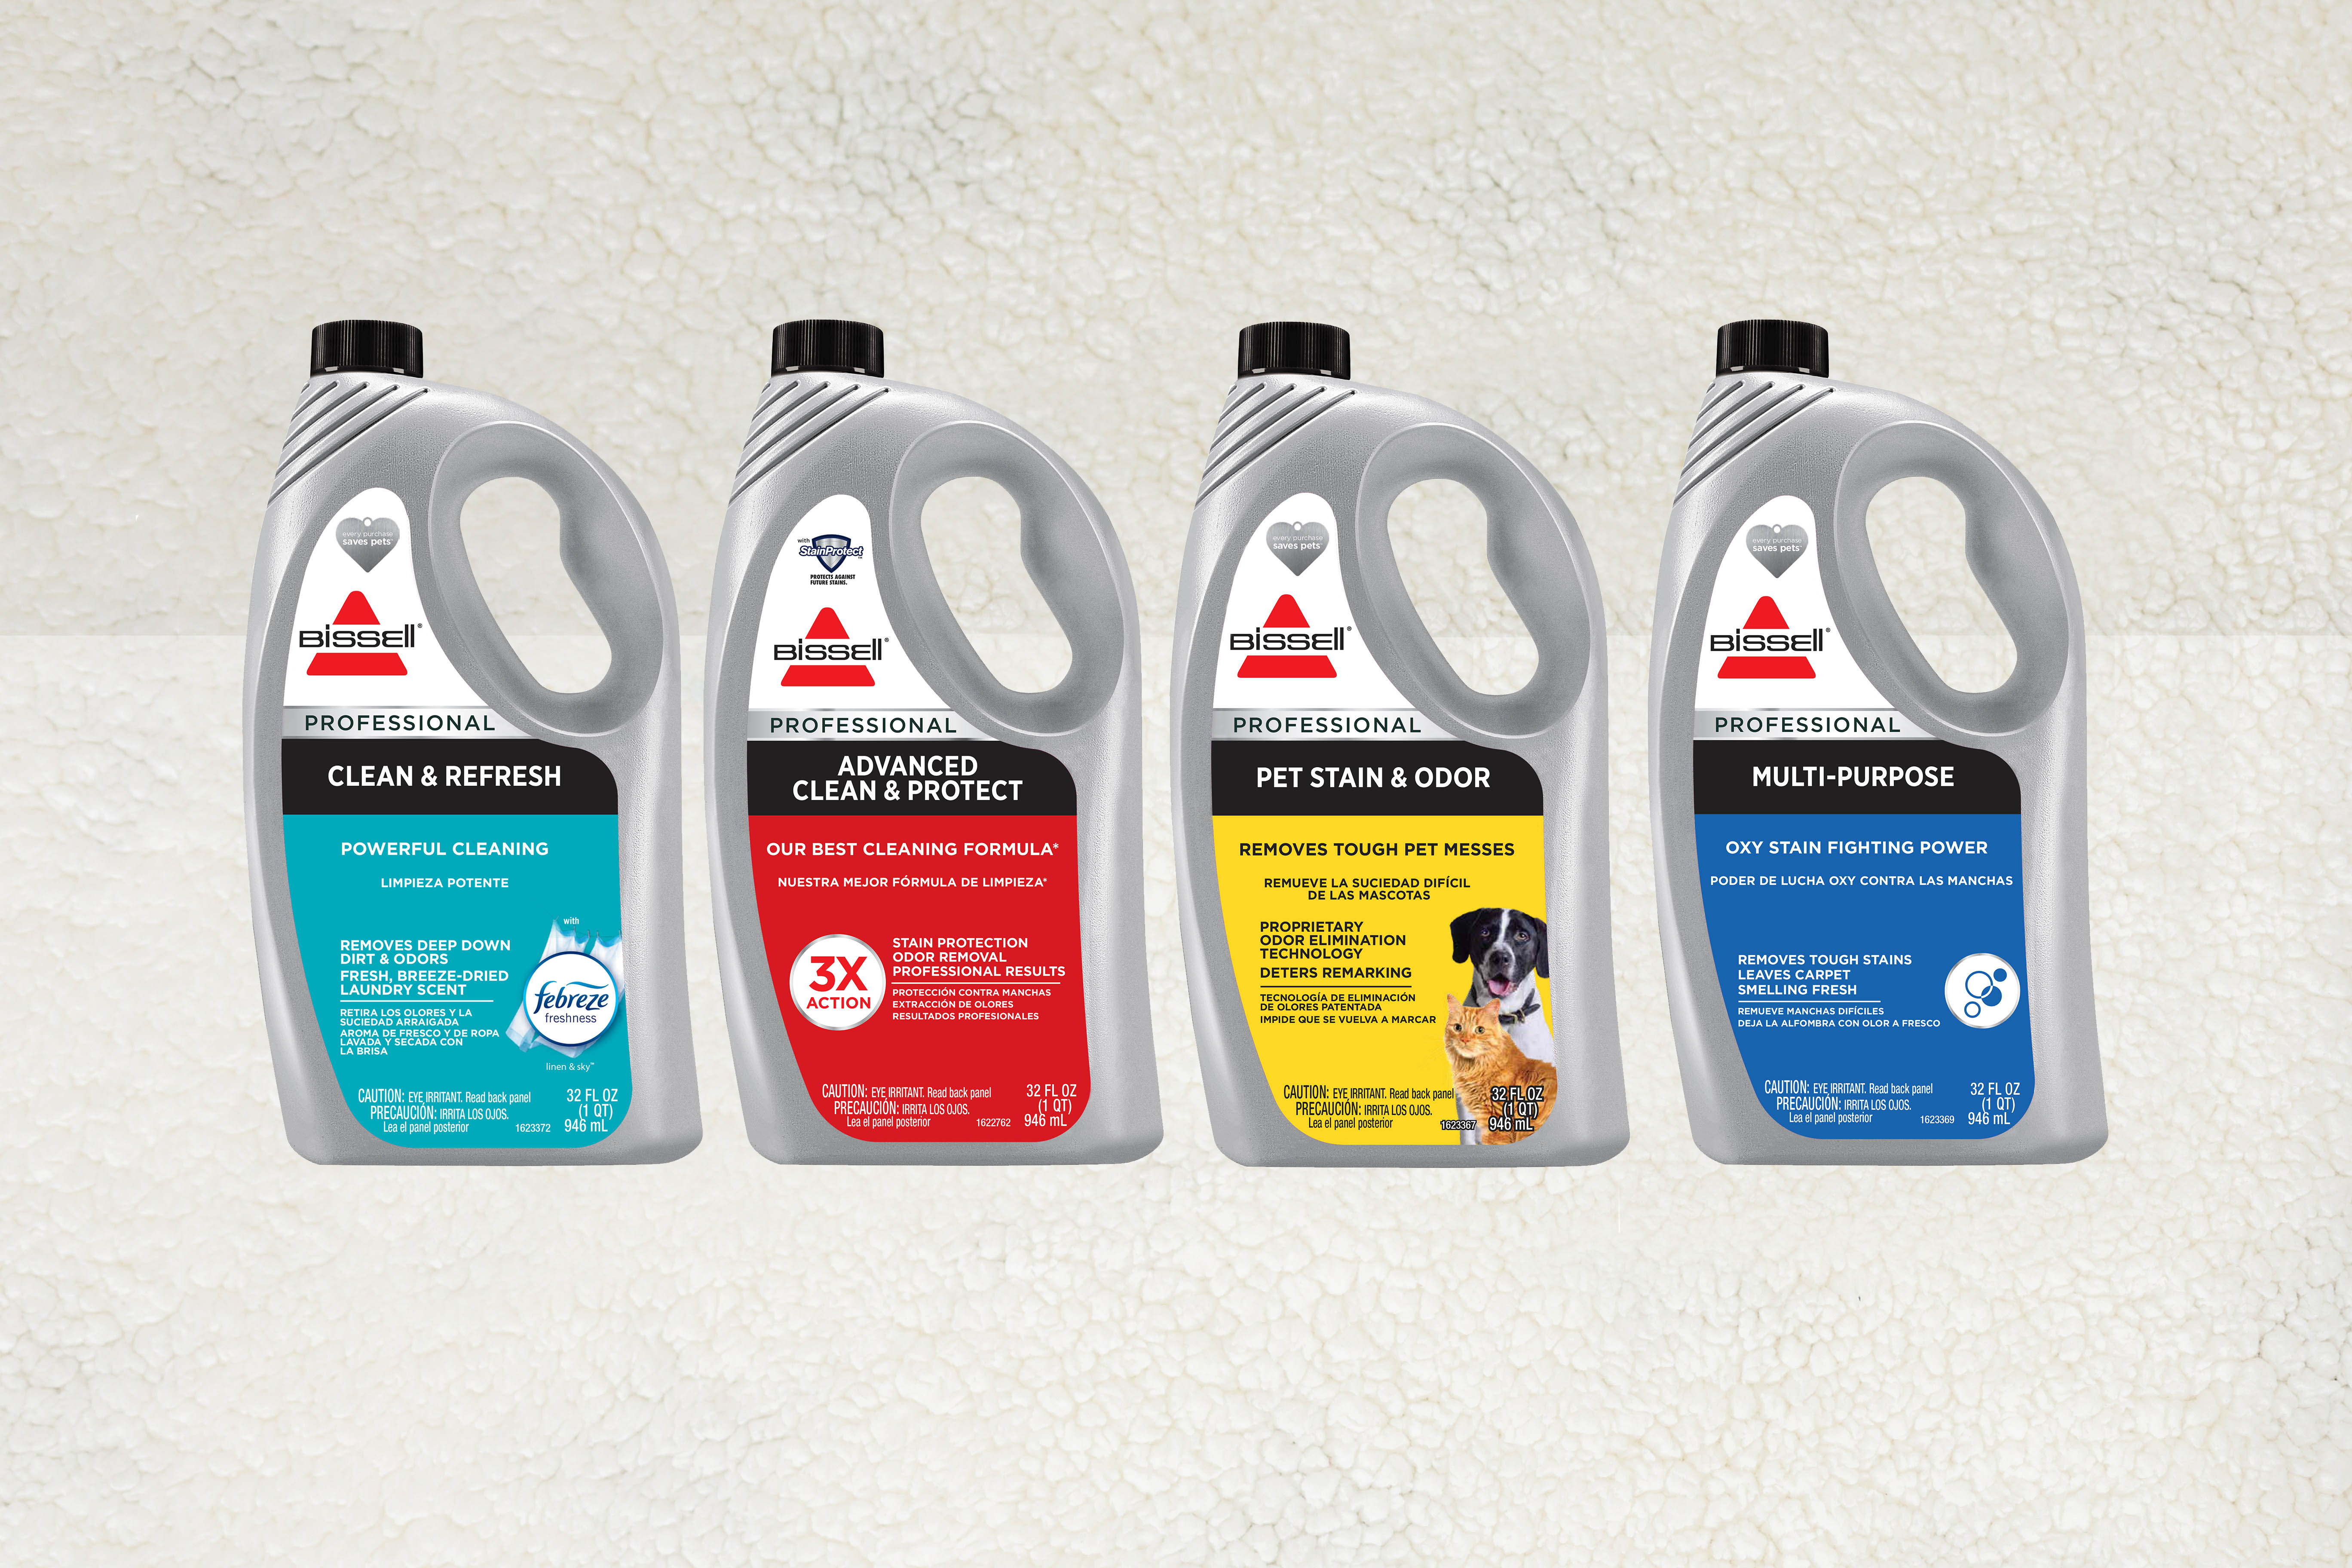 Did you know your DIY homemade carpet cleaner may be doing damage? Read here to find out how BISSELL Rental can help